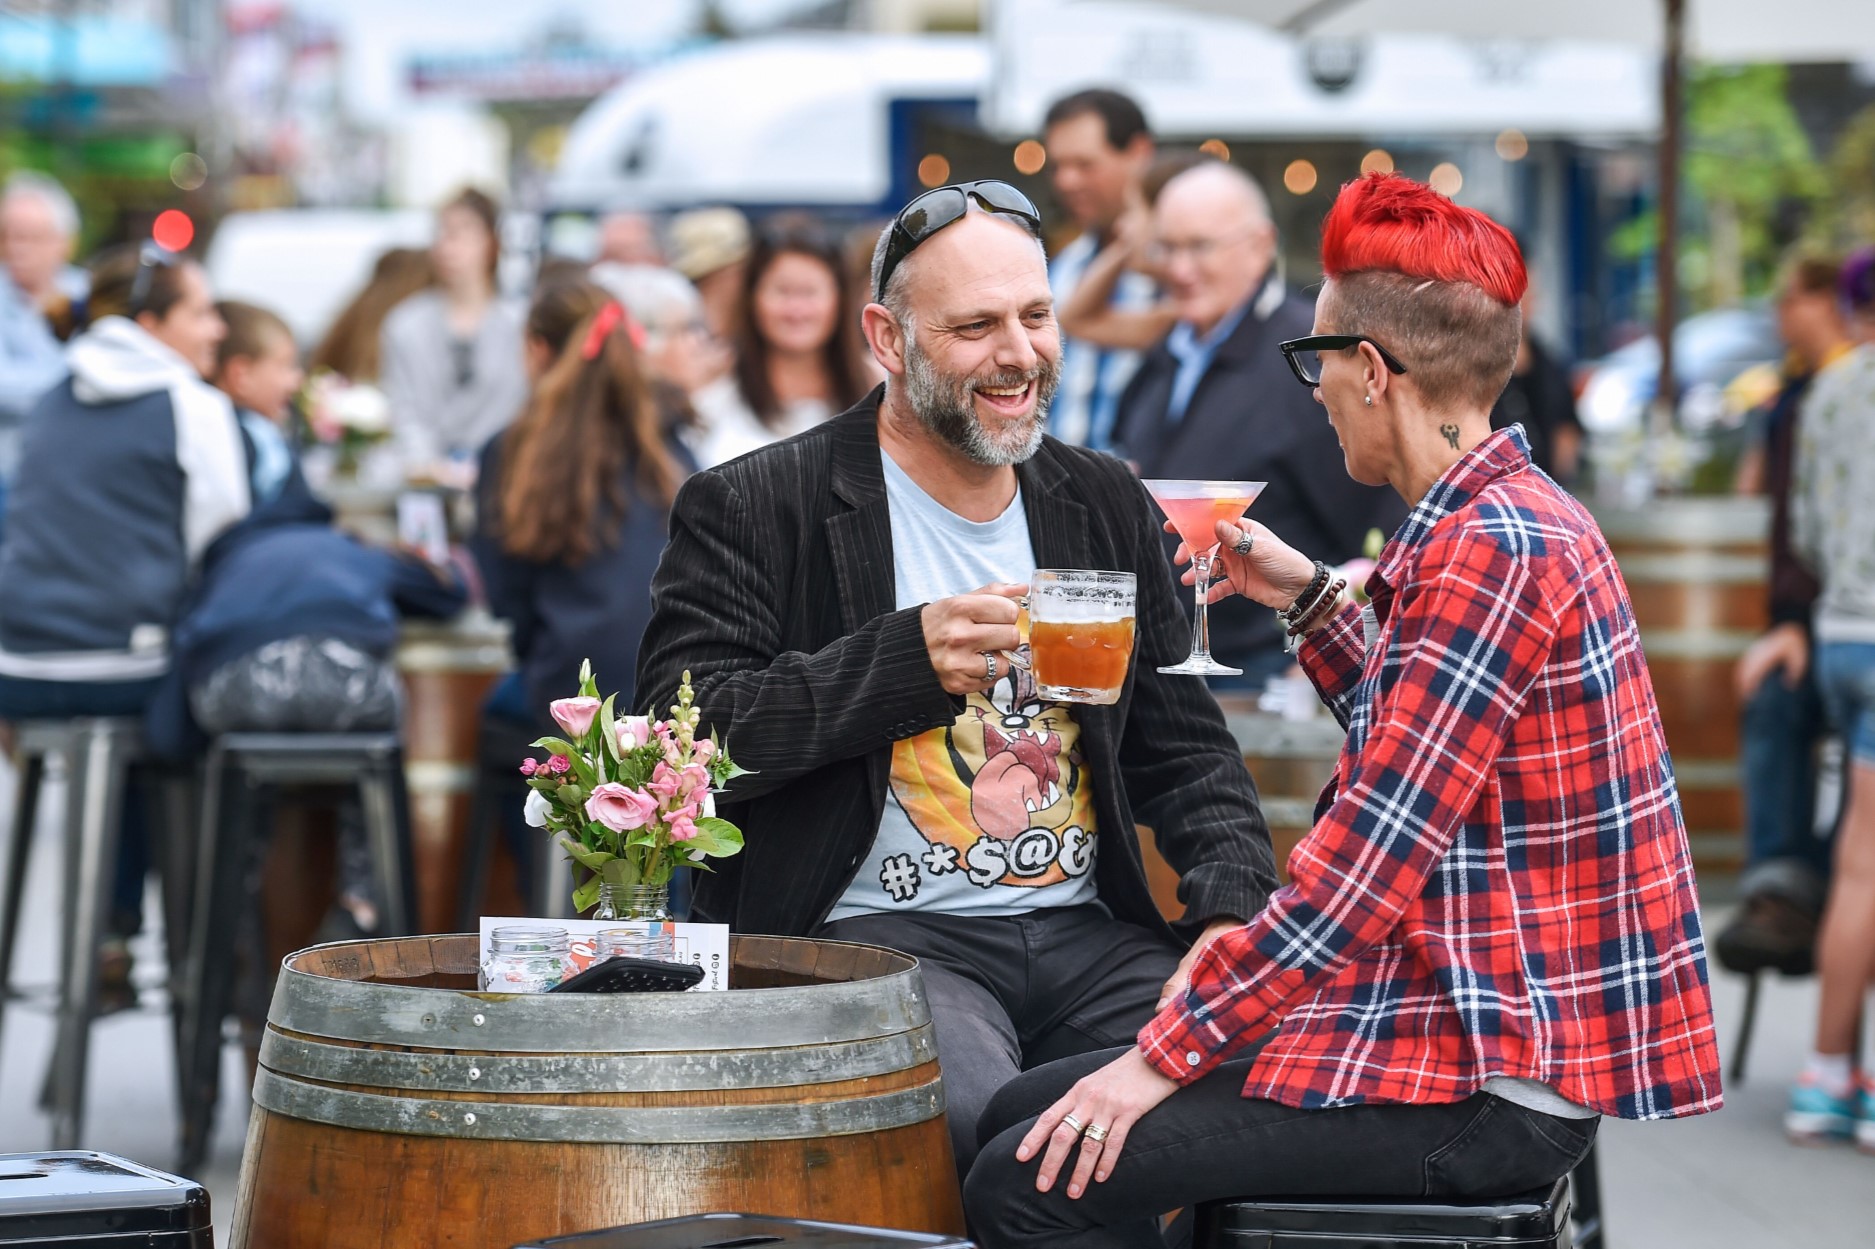 two people enjoying a drink amongst a crowd of people